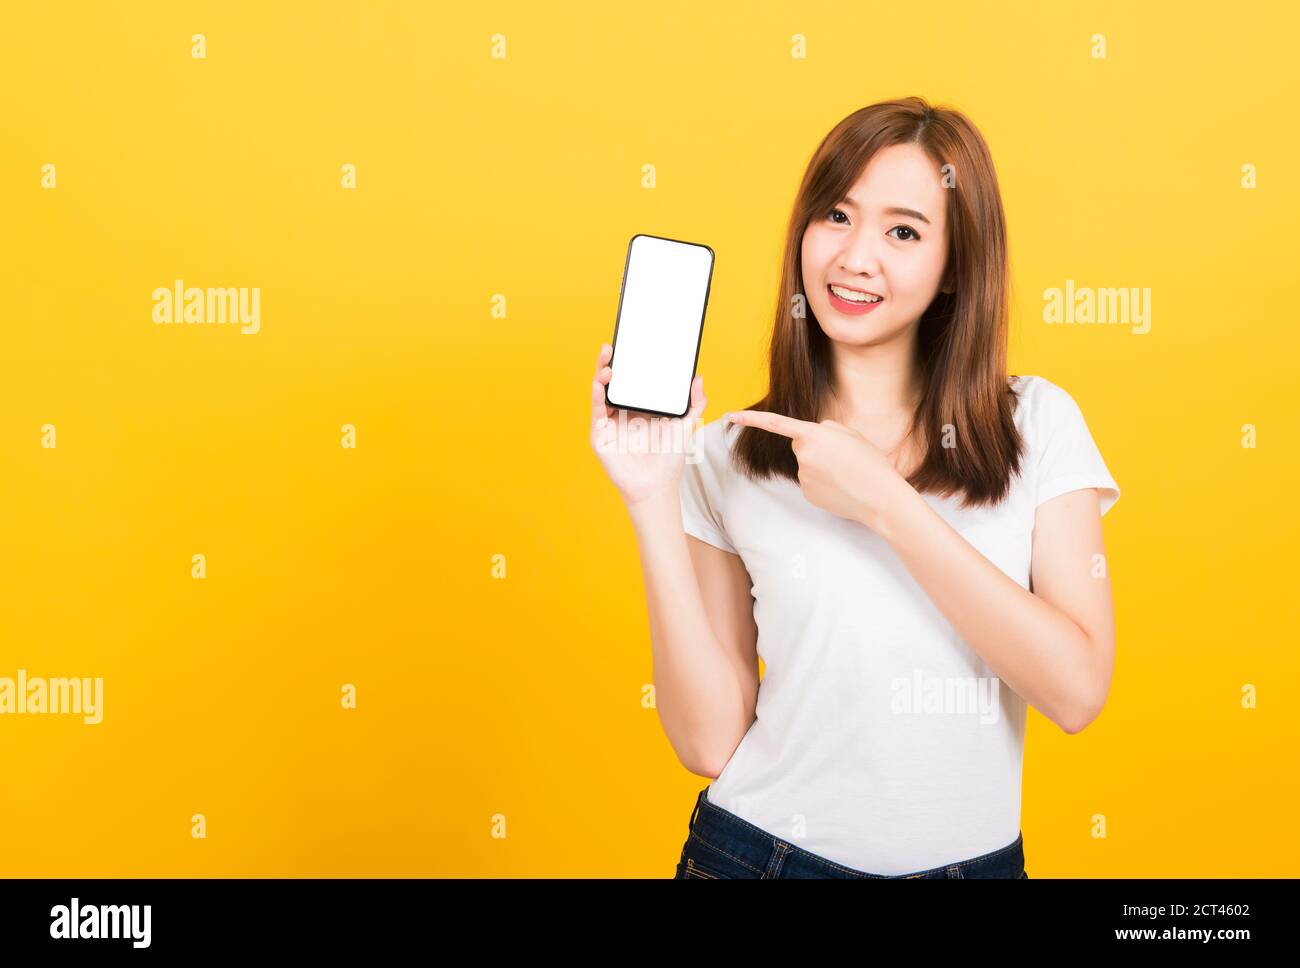 Asian happy portrait beautiful cute young woman smile standing wear t-shirt making finger pointing on smartphone blank screen looking to camera isolat Stock Photo